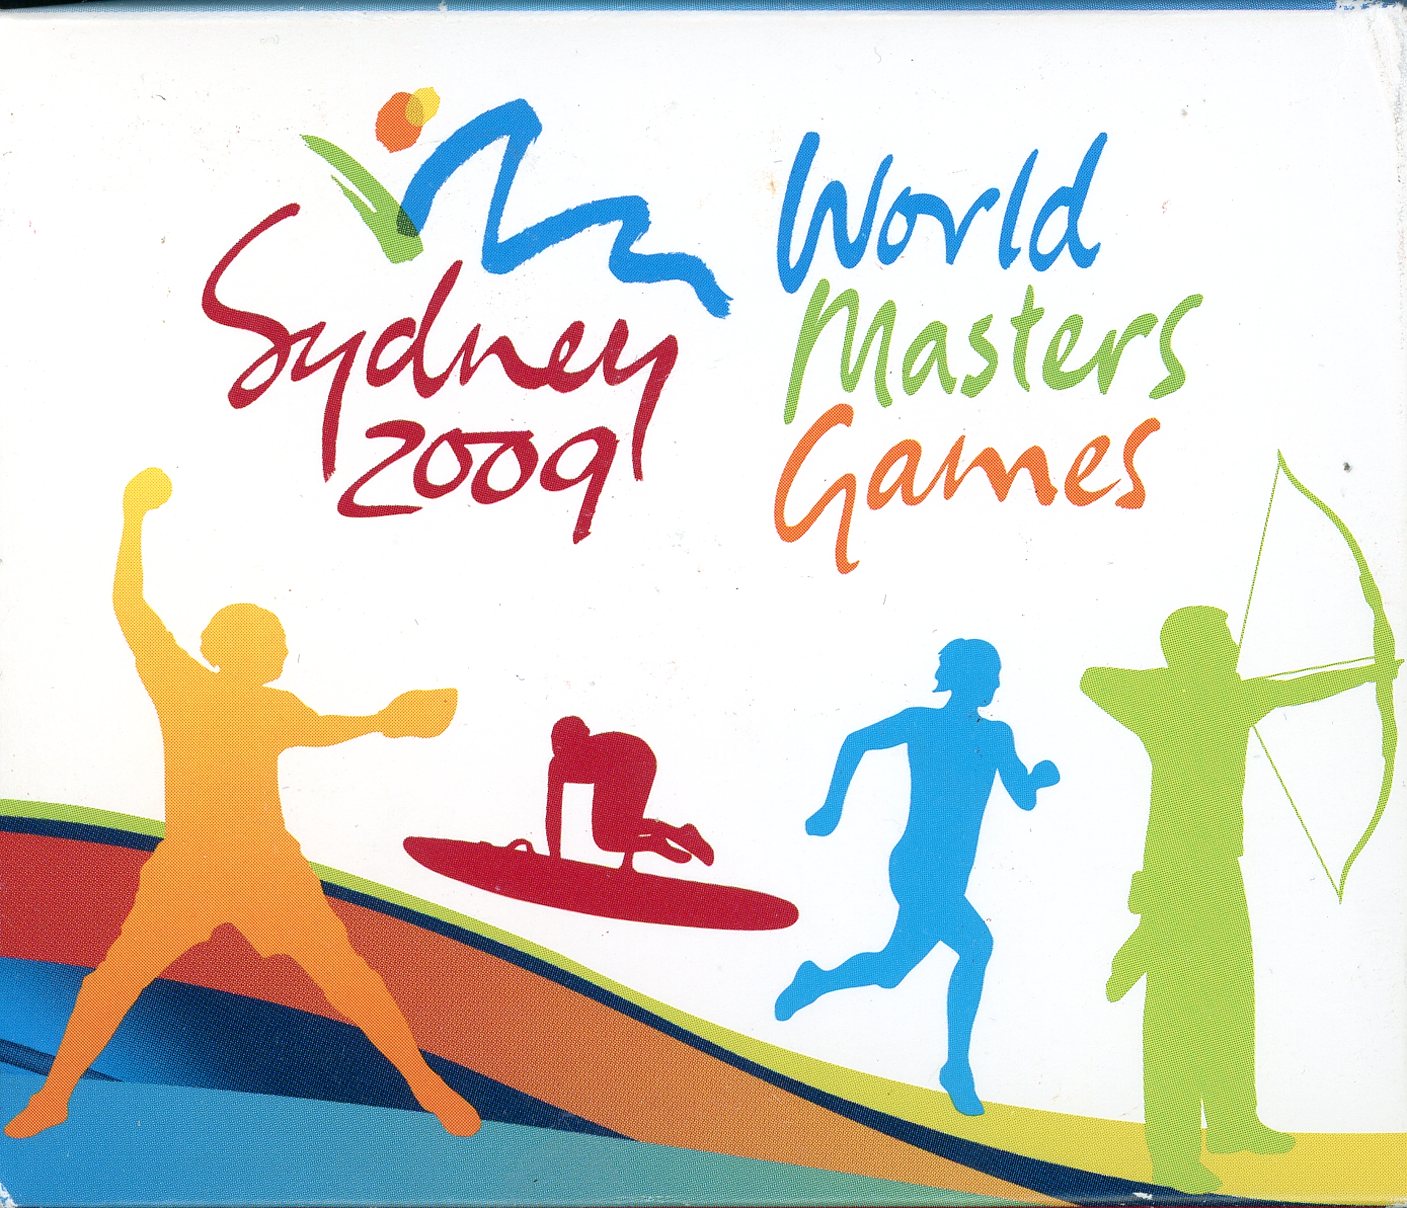 Thumbnail for 2009 Sydney World Masters Games 1oz Coloured Silver Proof Coin